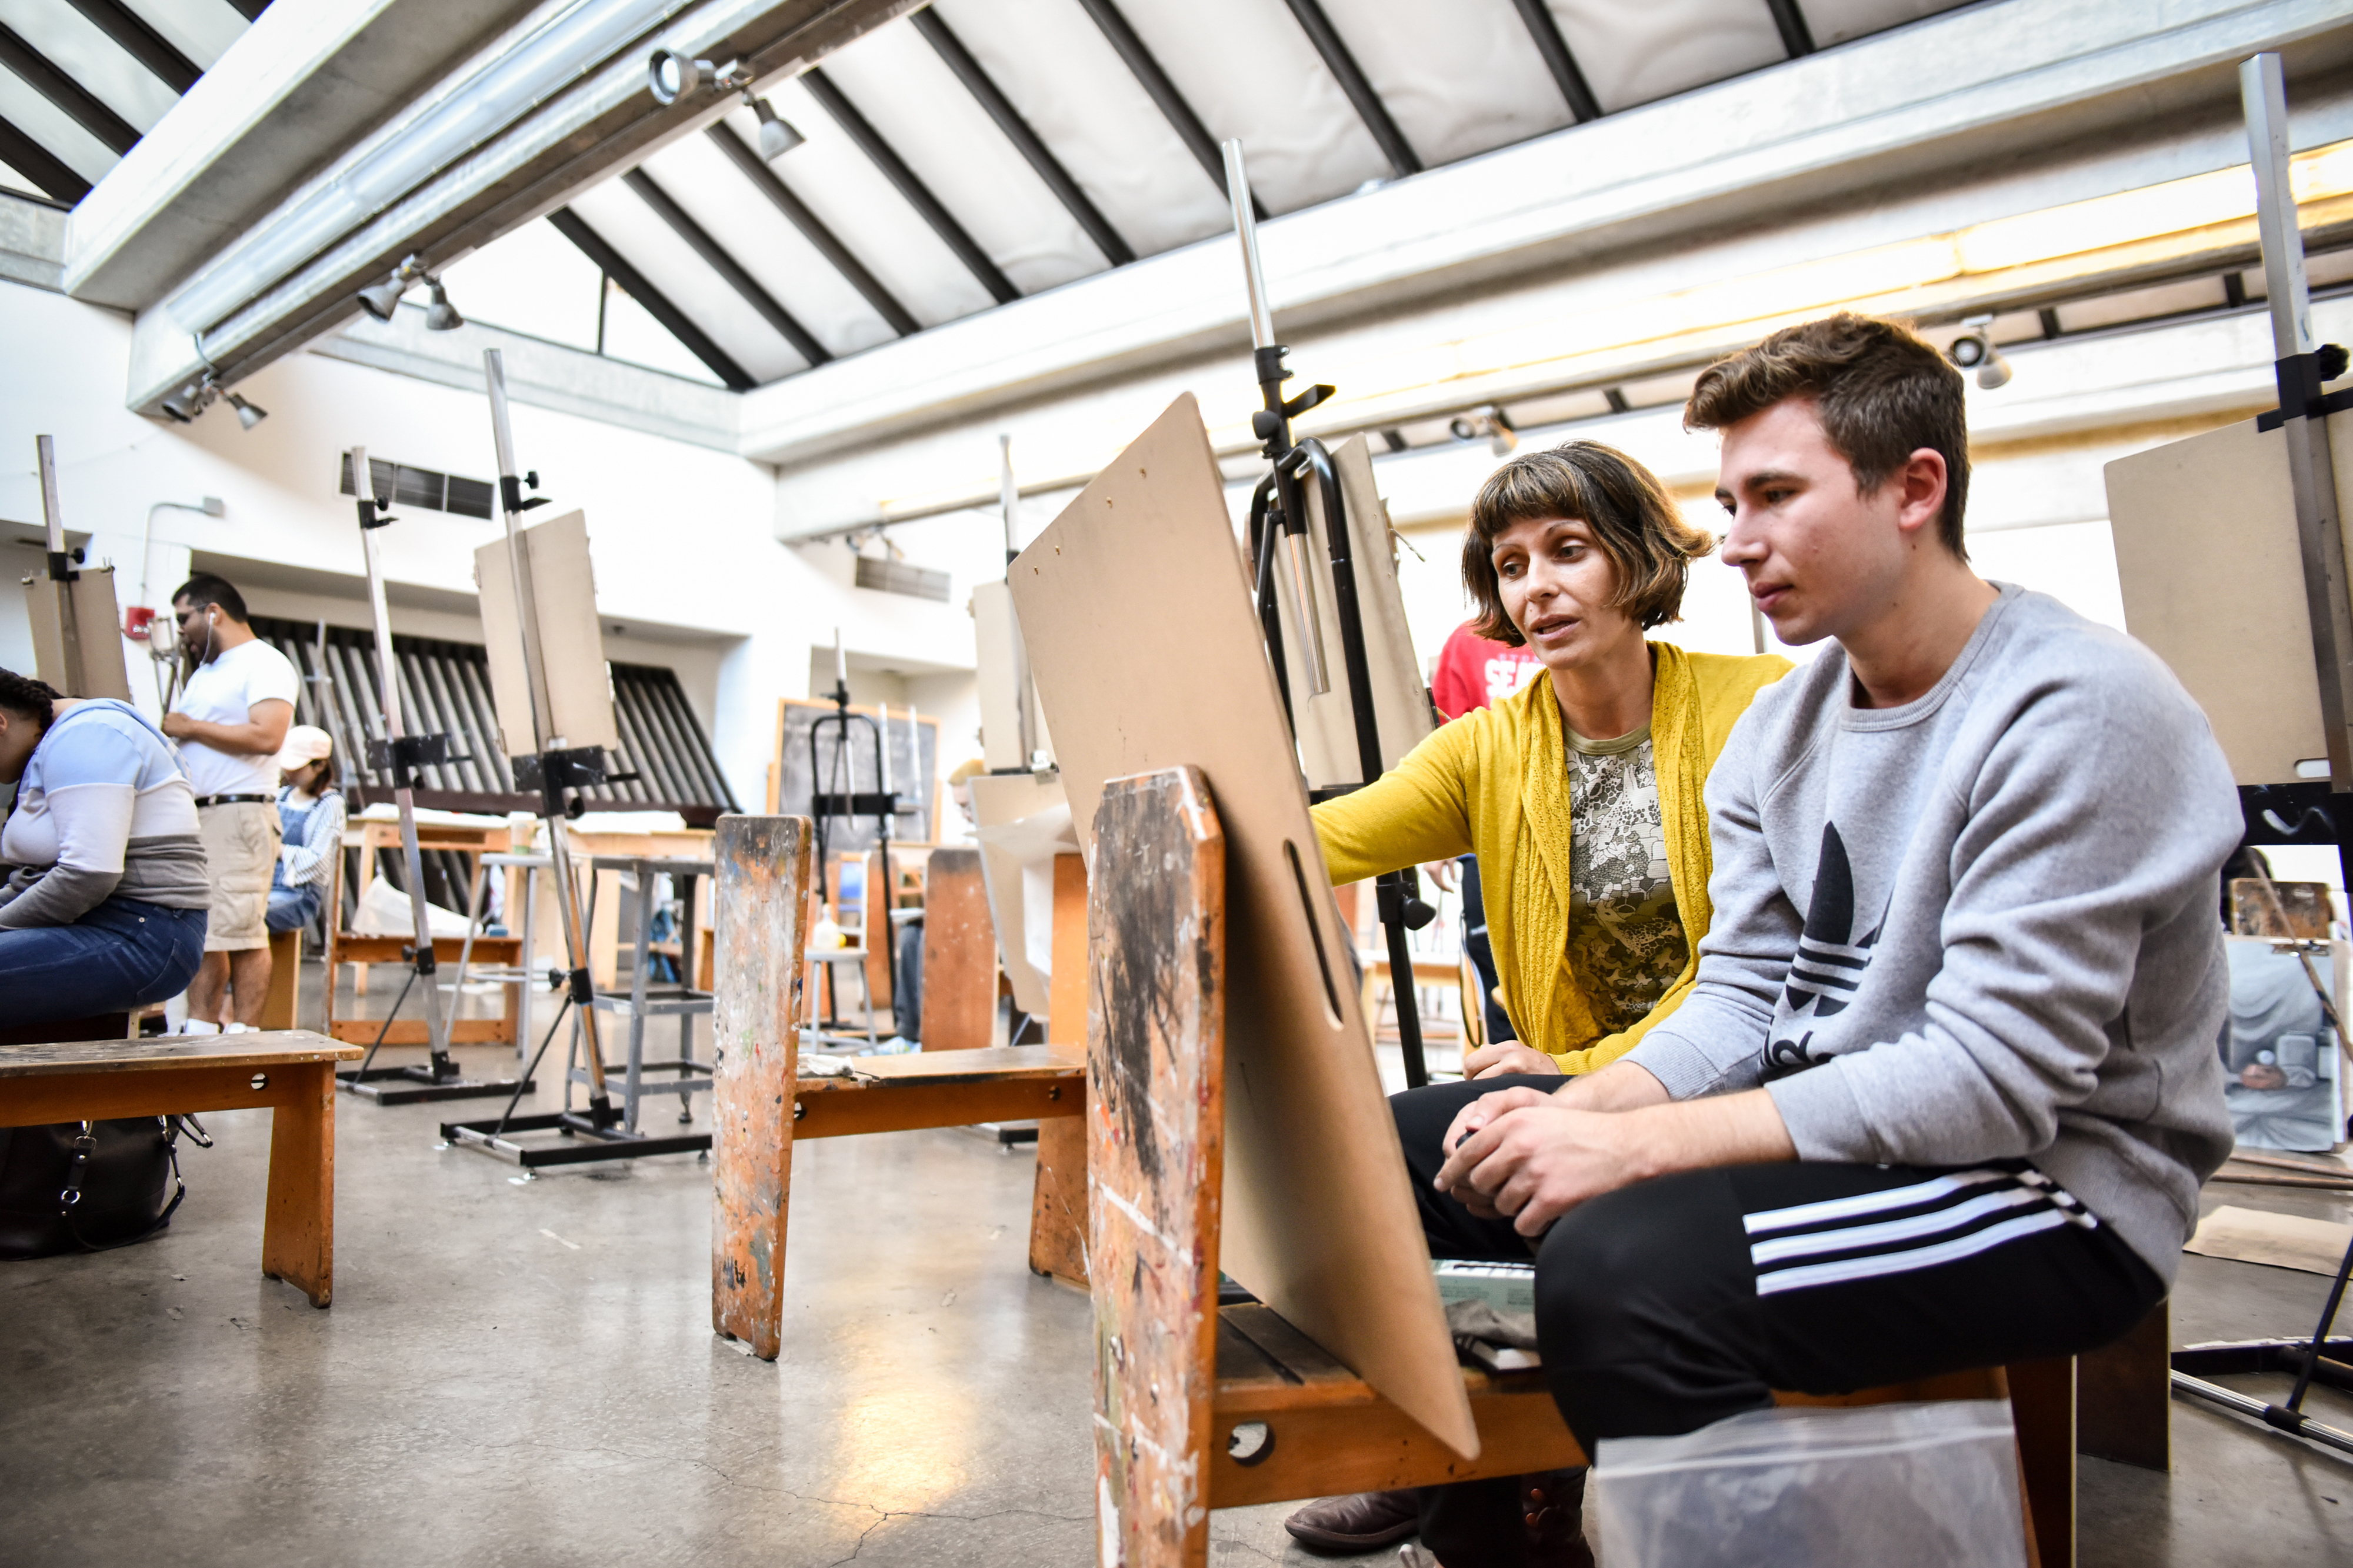 A faculty member oversees a student art project at an easel.